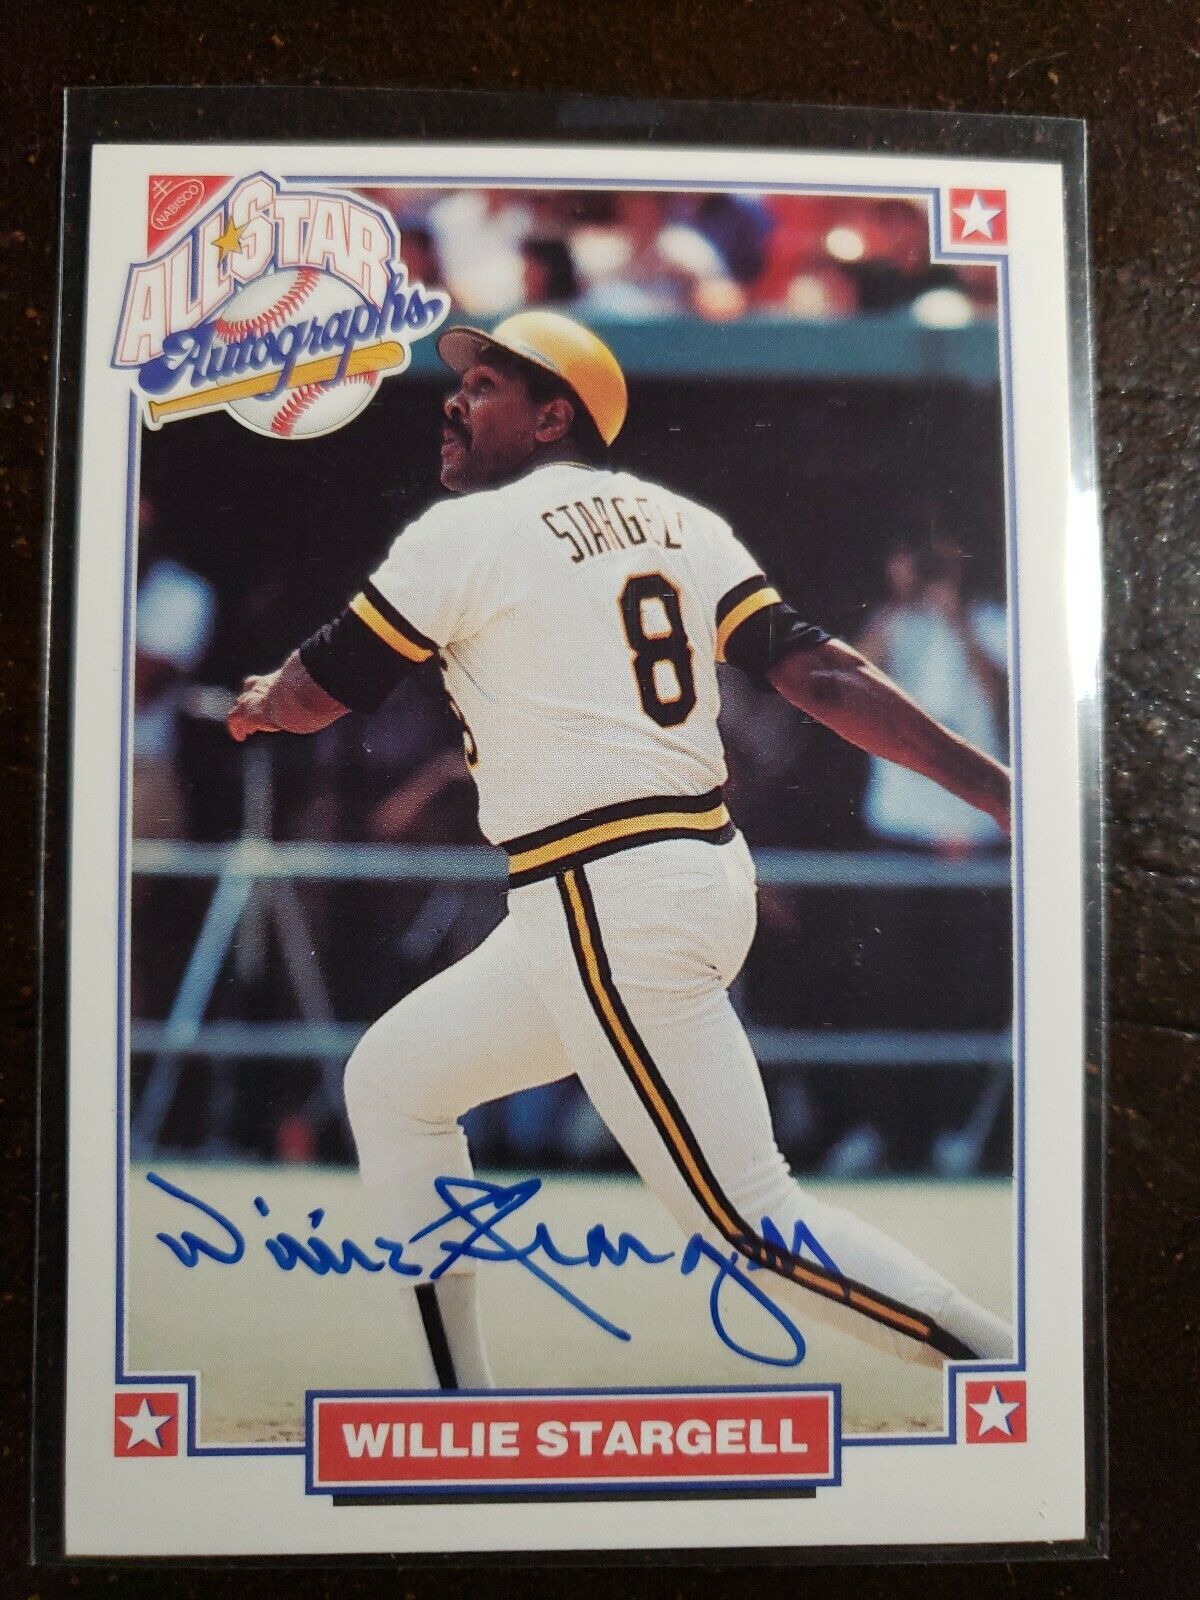 1993 Nabisco All Star Willie Stargell Auto Autograph Signed Card Pirates HOF